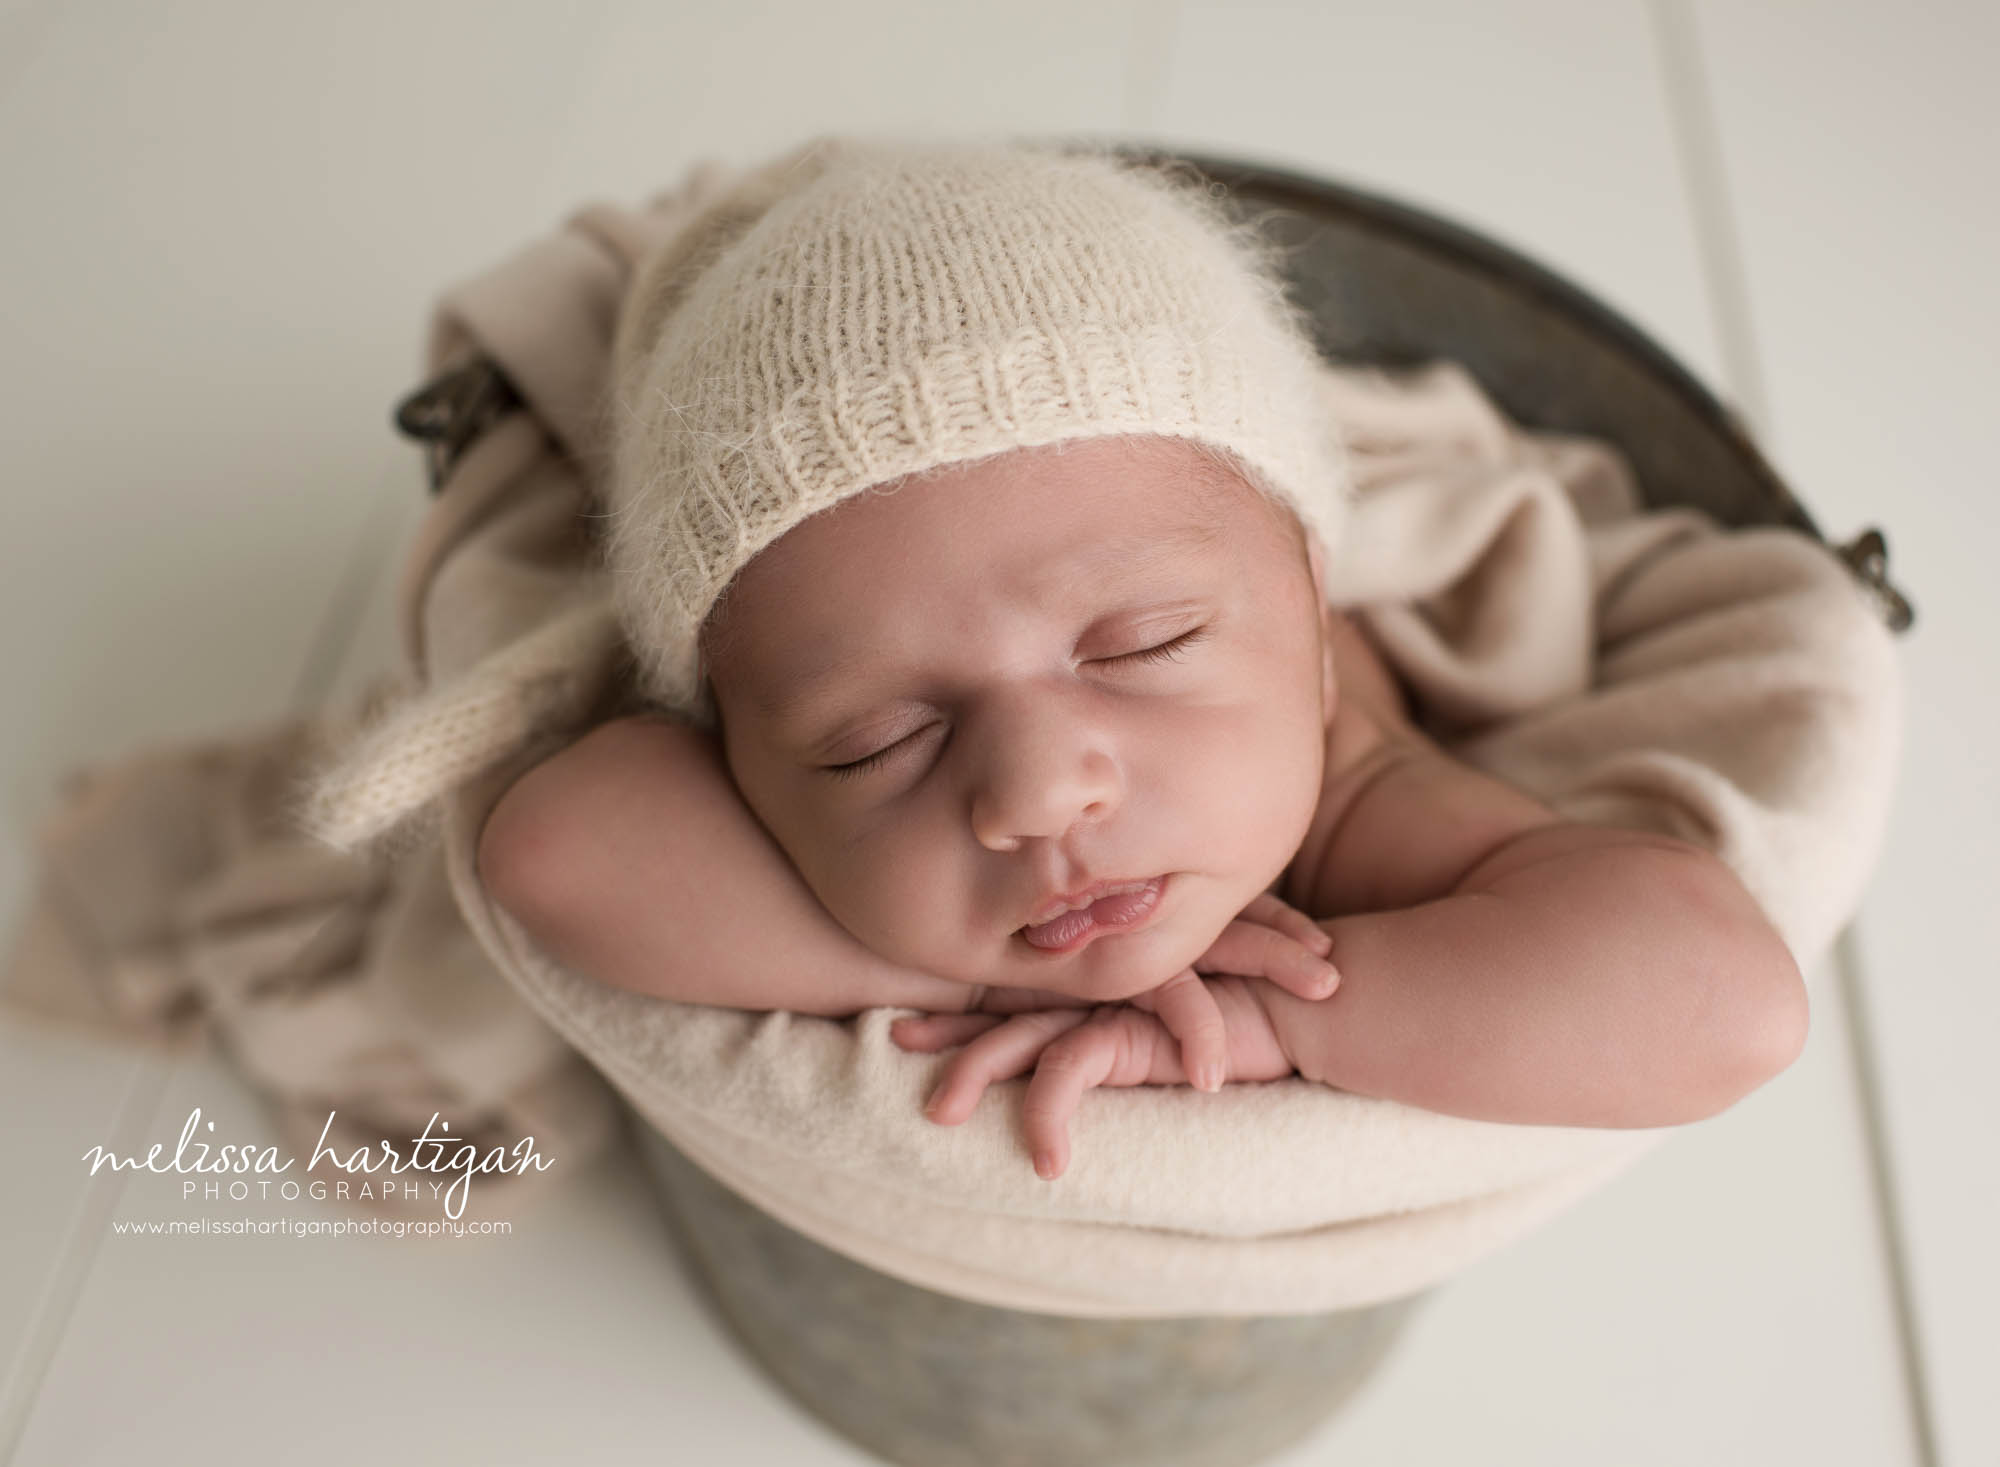 newborn baby boy posed in metal bucket with tan colored layer and knitted sleepy cap